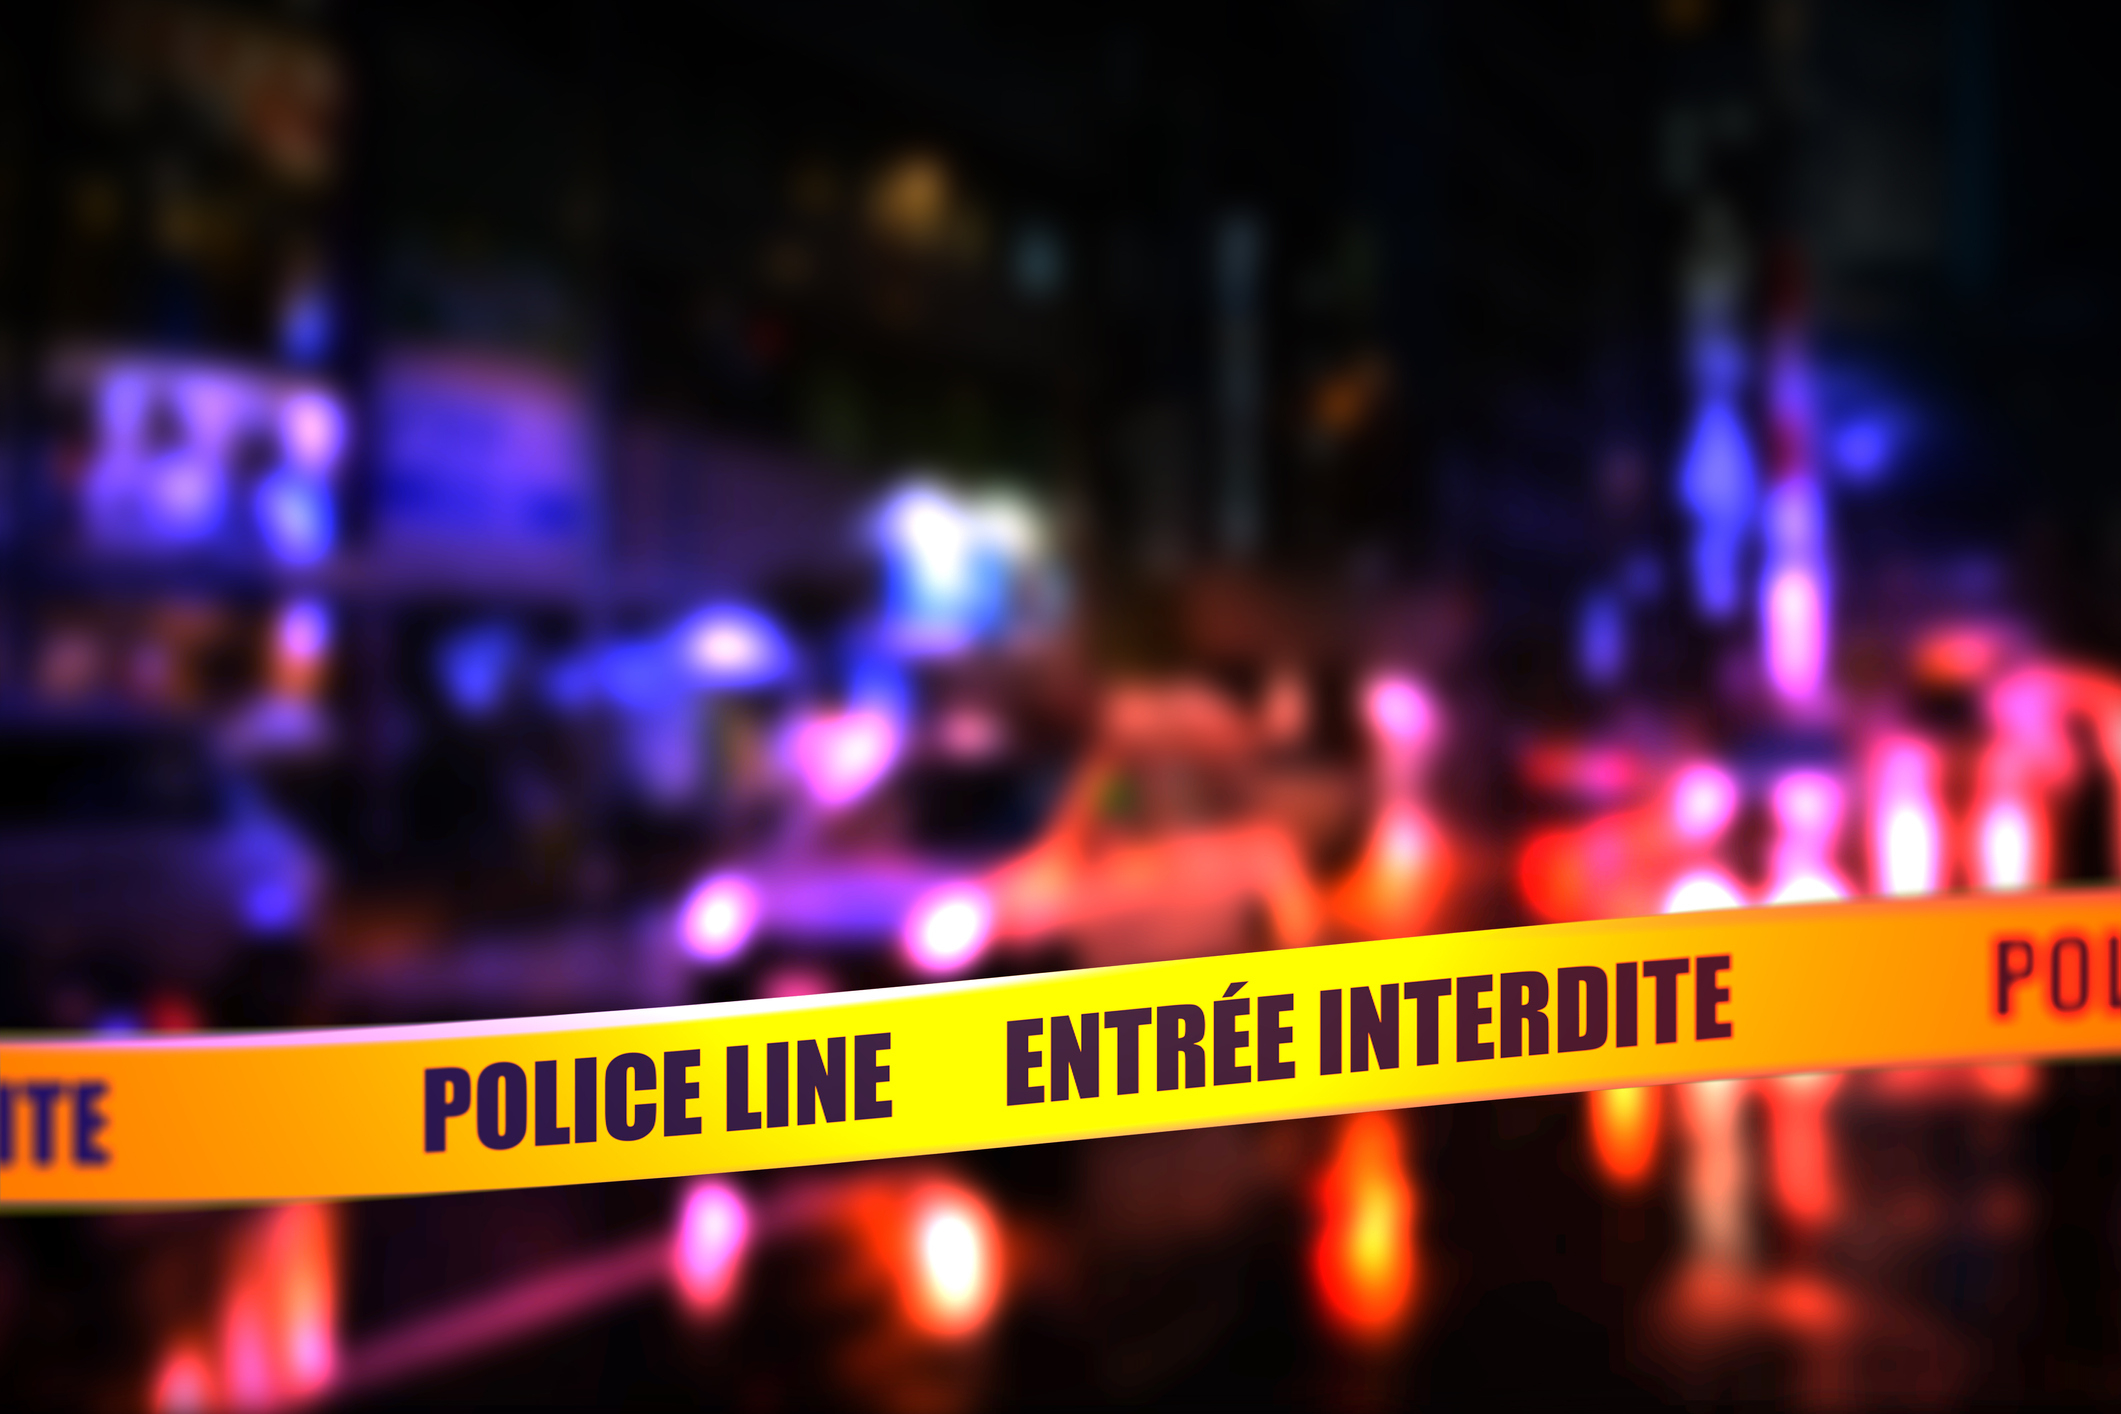 Blurred nighttime scene with a focused &quot;POLICE LINE ENTRÉE INTERDITE&quot; tape across the foreground